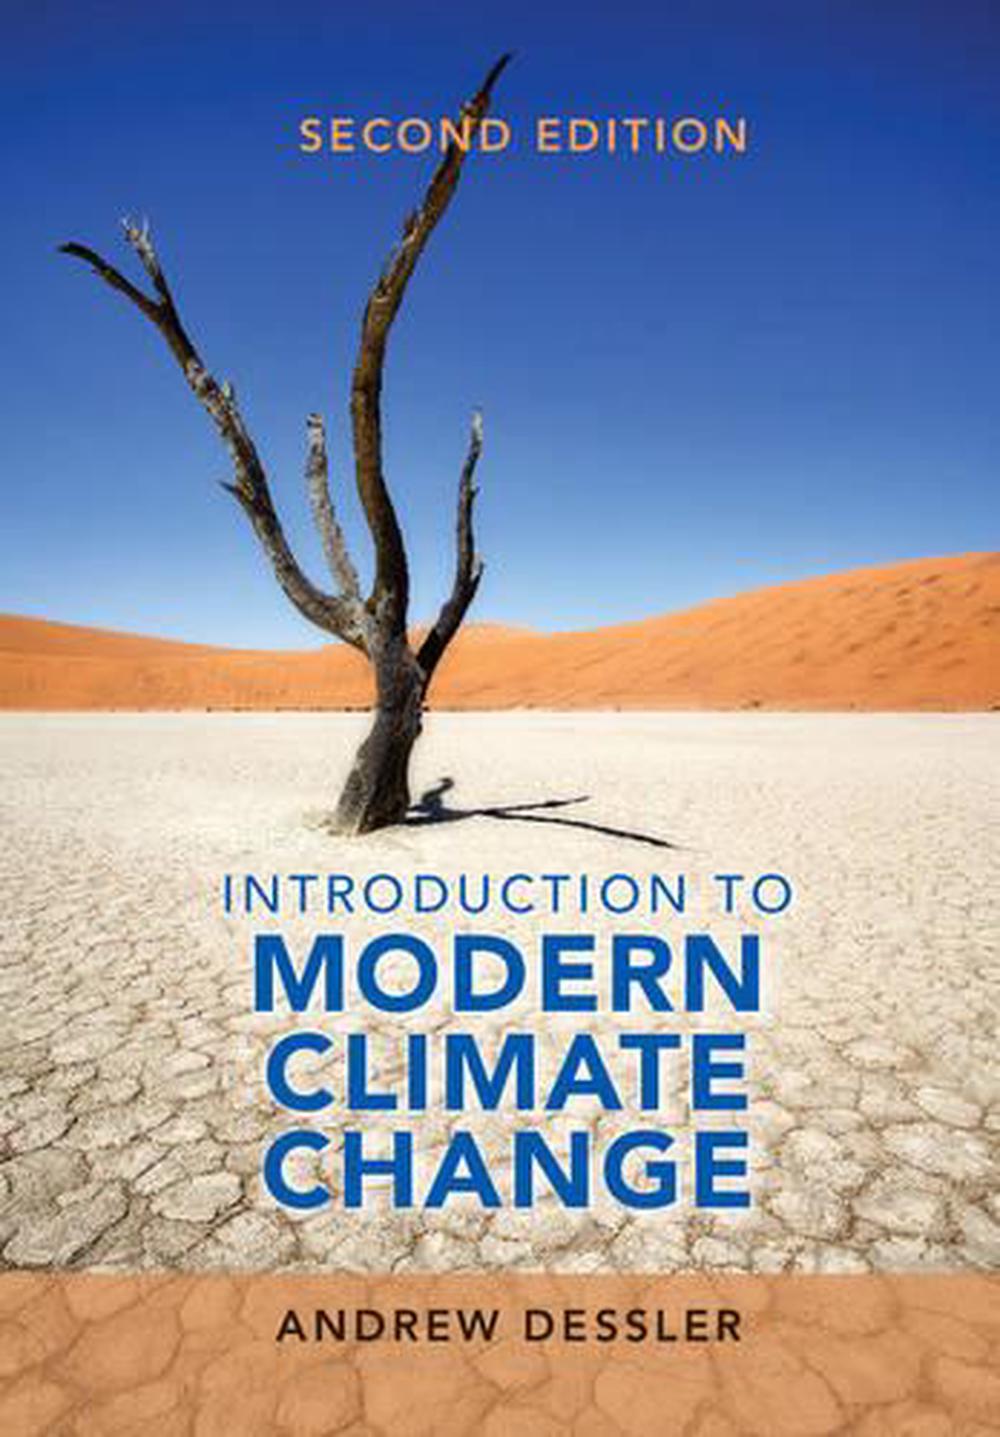 Introduction to Modern Climate Change by Andrew Dessler (English